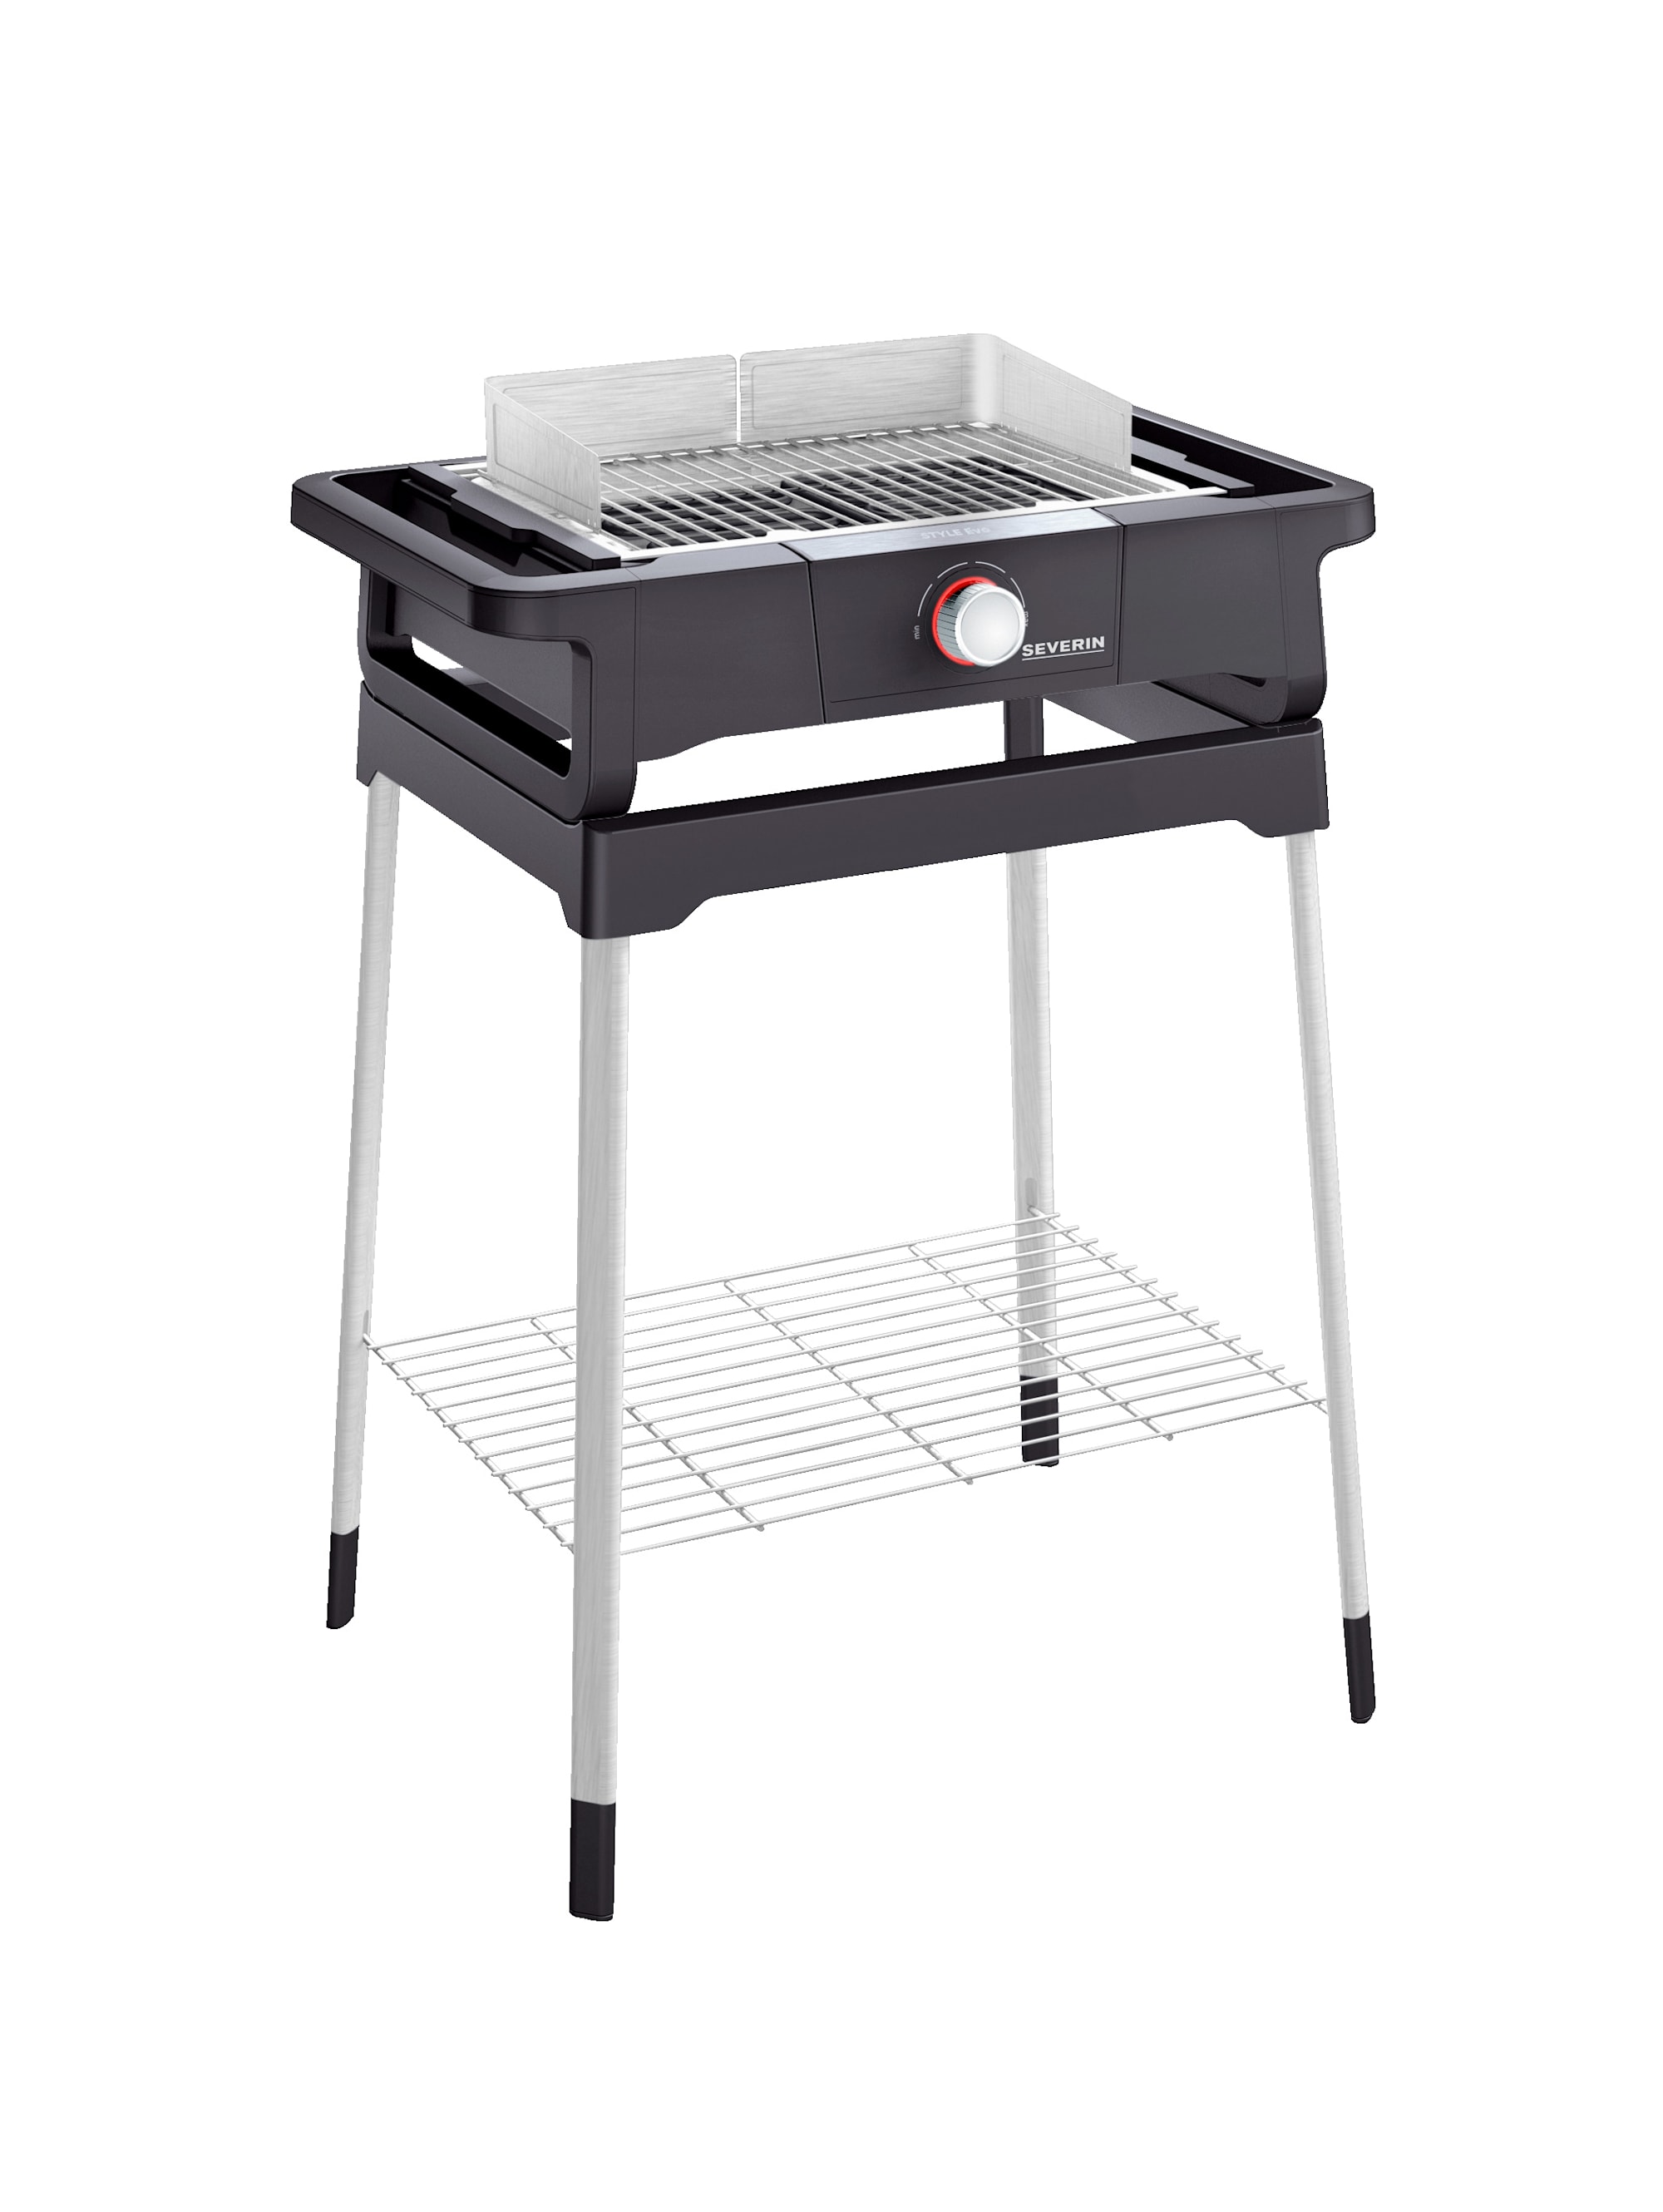 SEVERIN Standgrill STYLE EVO ca. 8124 S PG